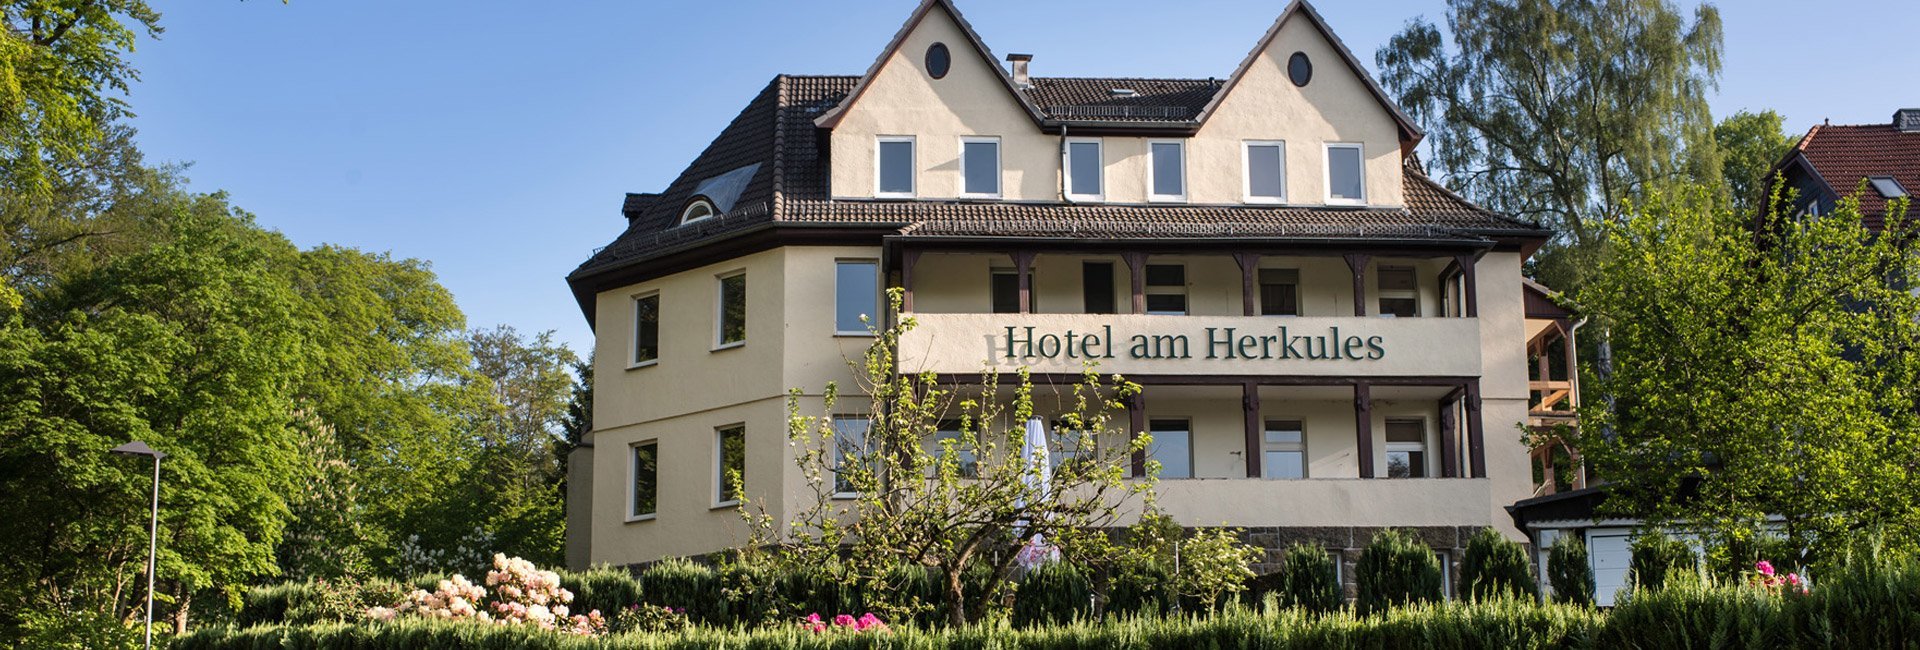 3 Tage Herkules Tracking and Relaxing – Hotel am Herkules  in Kassel, Hessen inkl. Halbpension